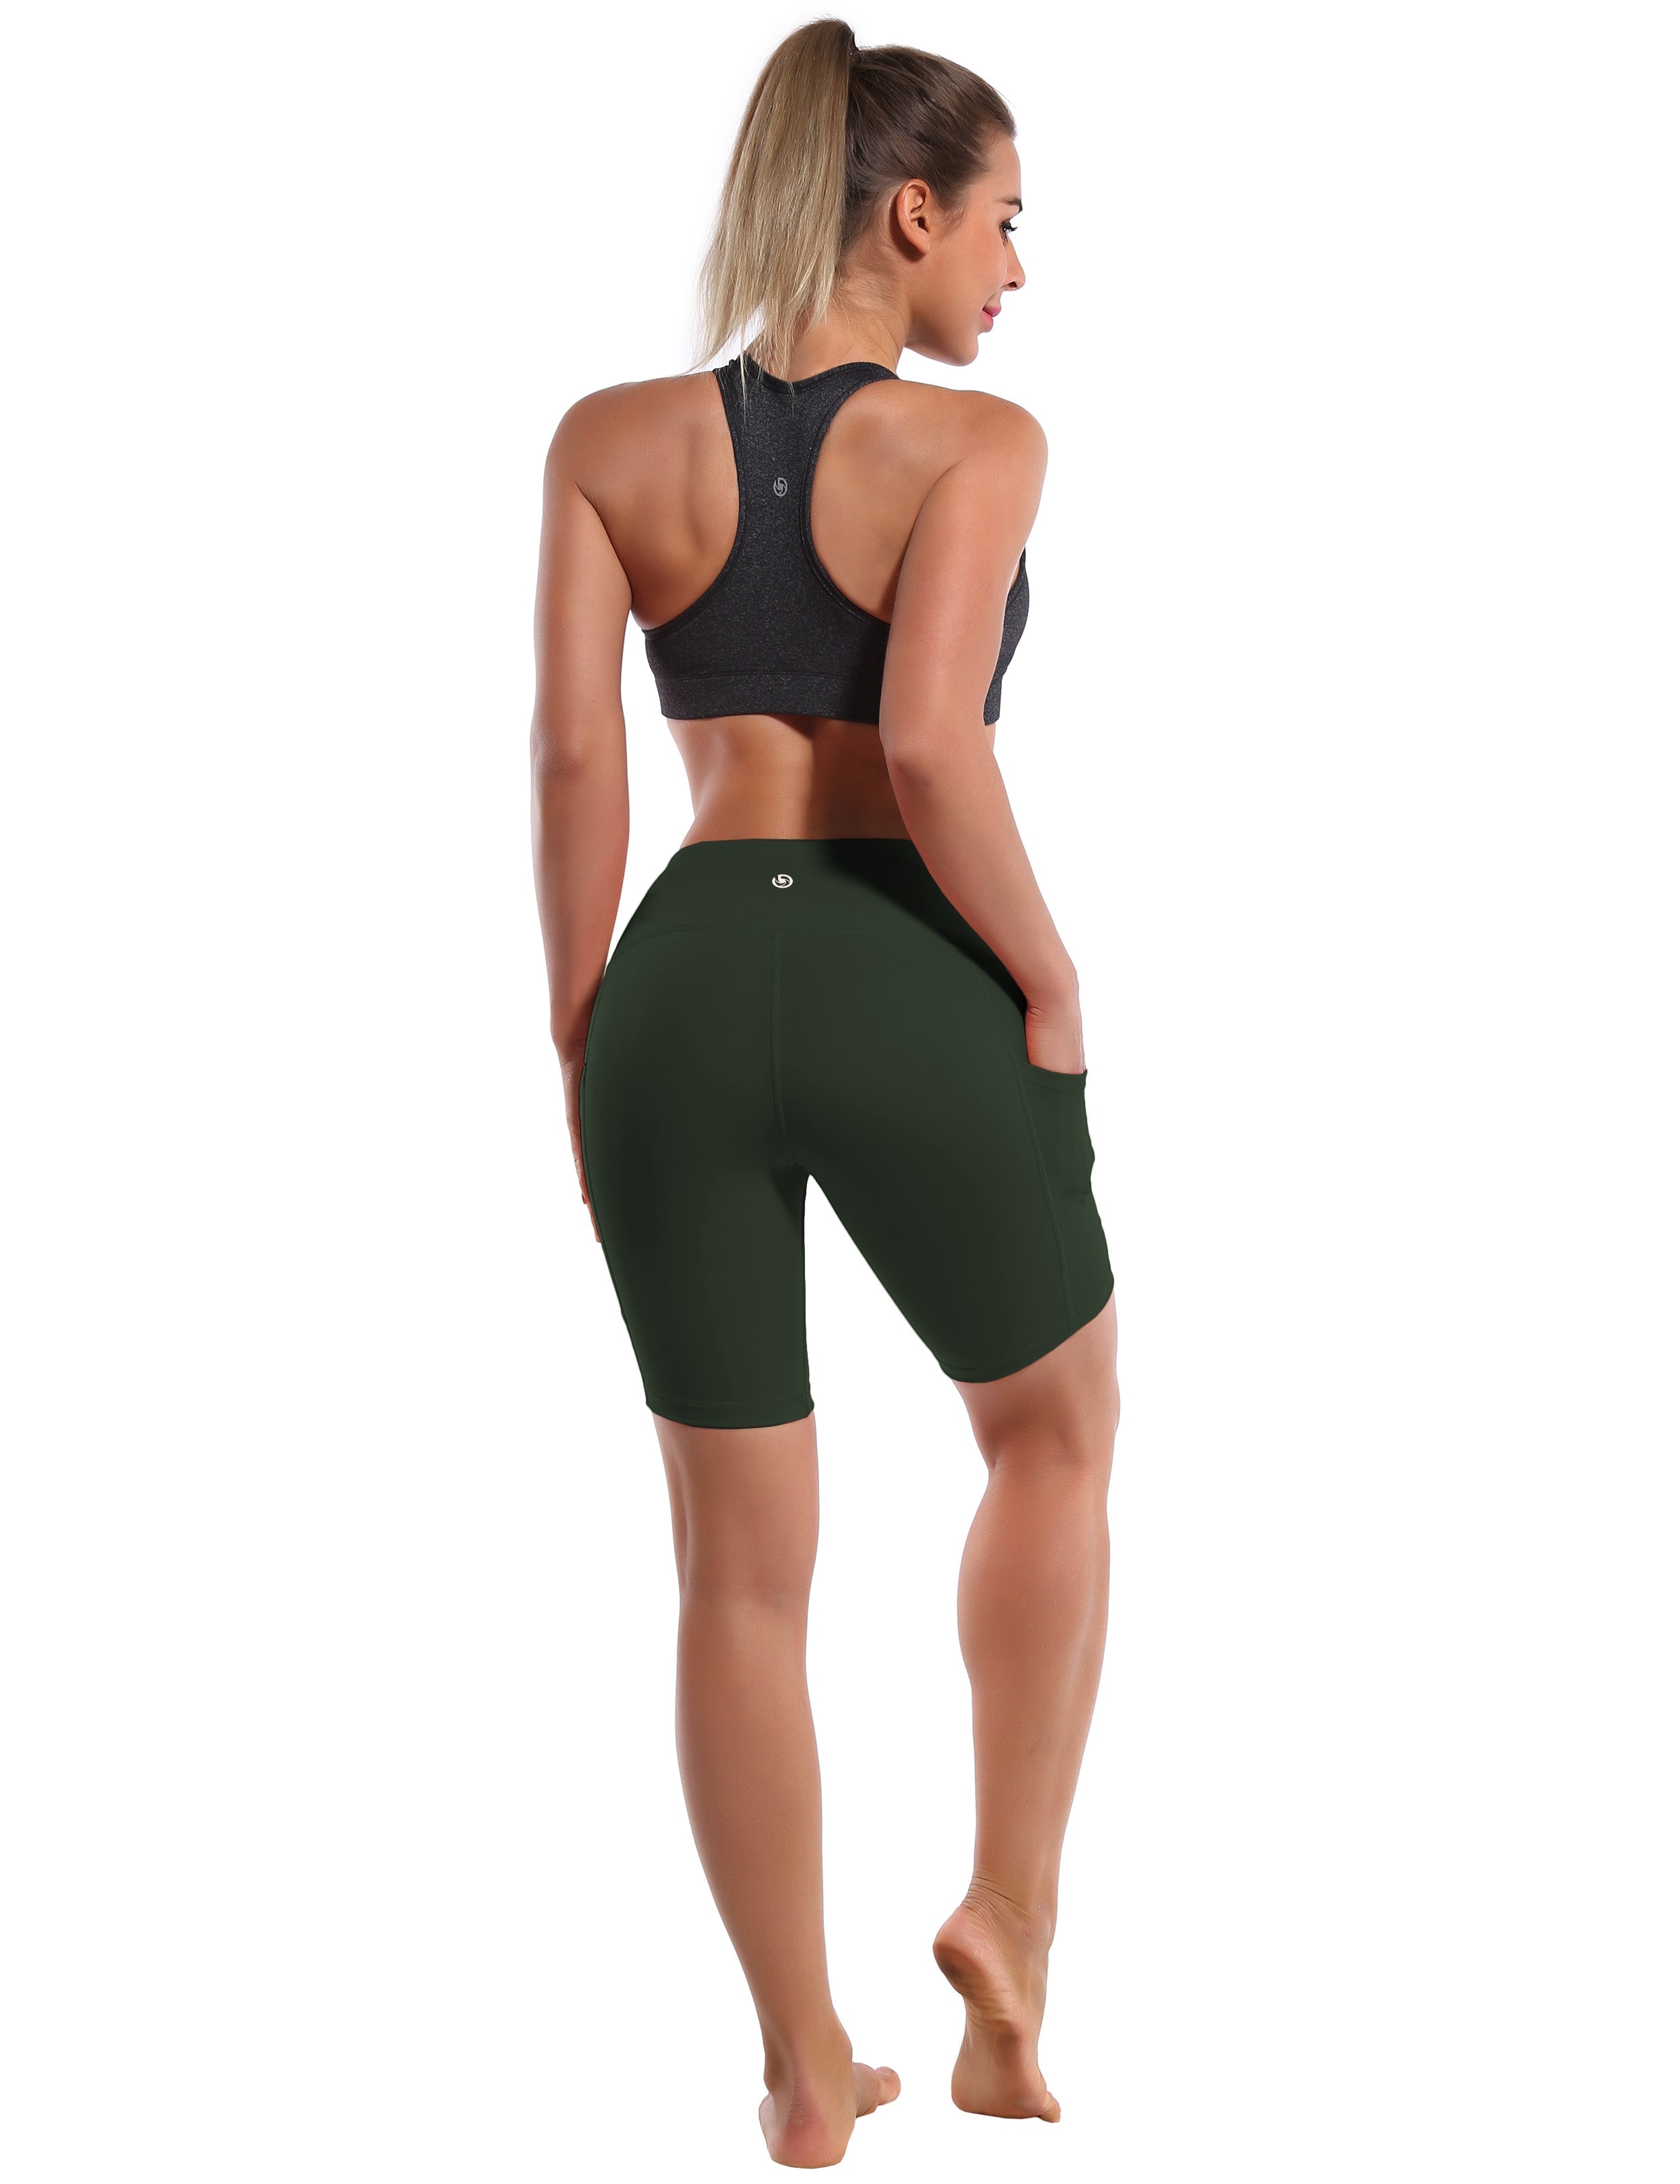 8" Side Pockets yogastudio Shorts olivegray Sleek, soft, smooth and totally comfortable: our newest style is here. Softest-ever fabric High elasticity High density 4-way stretch Fabric doesn't attract lint easily No see-through Moisture-wicking Machine wash 75% Nylon, 25% Spandex